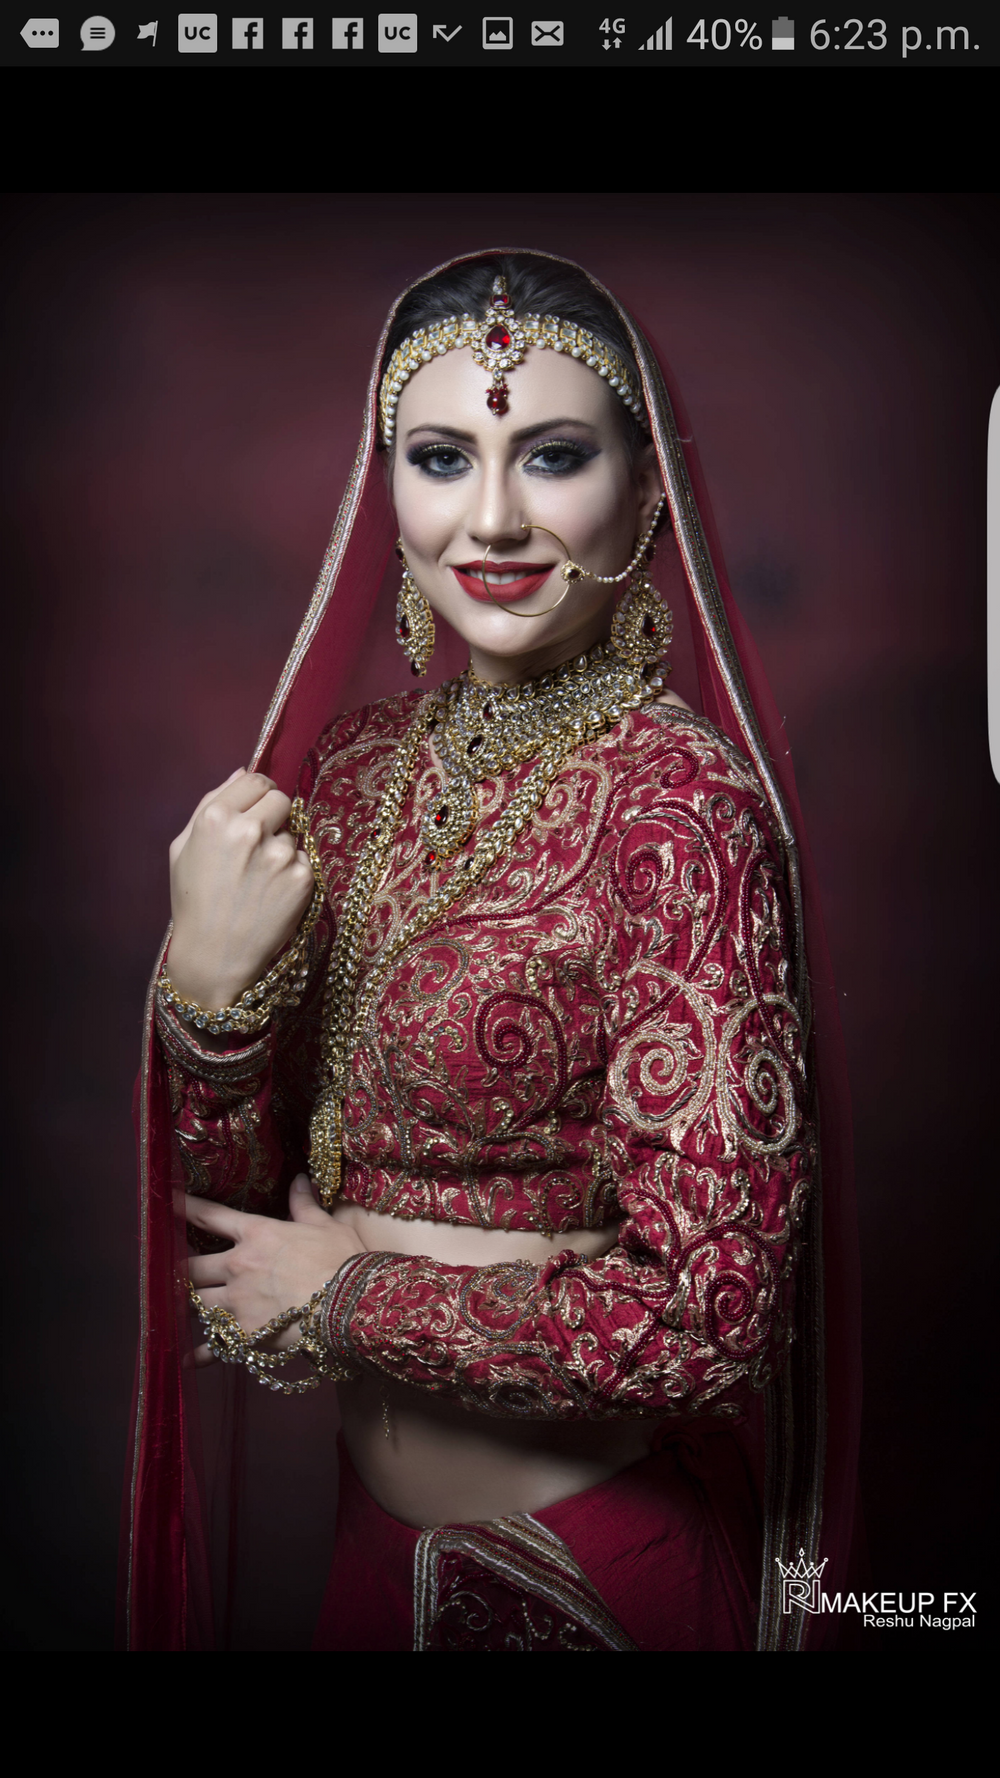 Photo From My work my art - By Makeup FX by Reshu Nagpal